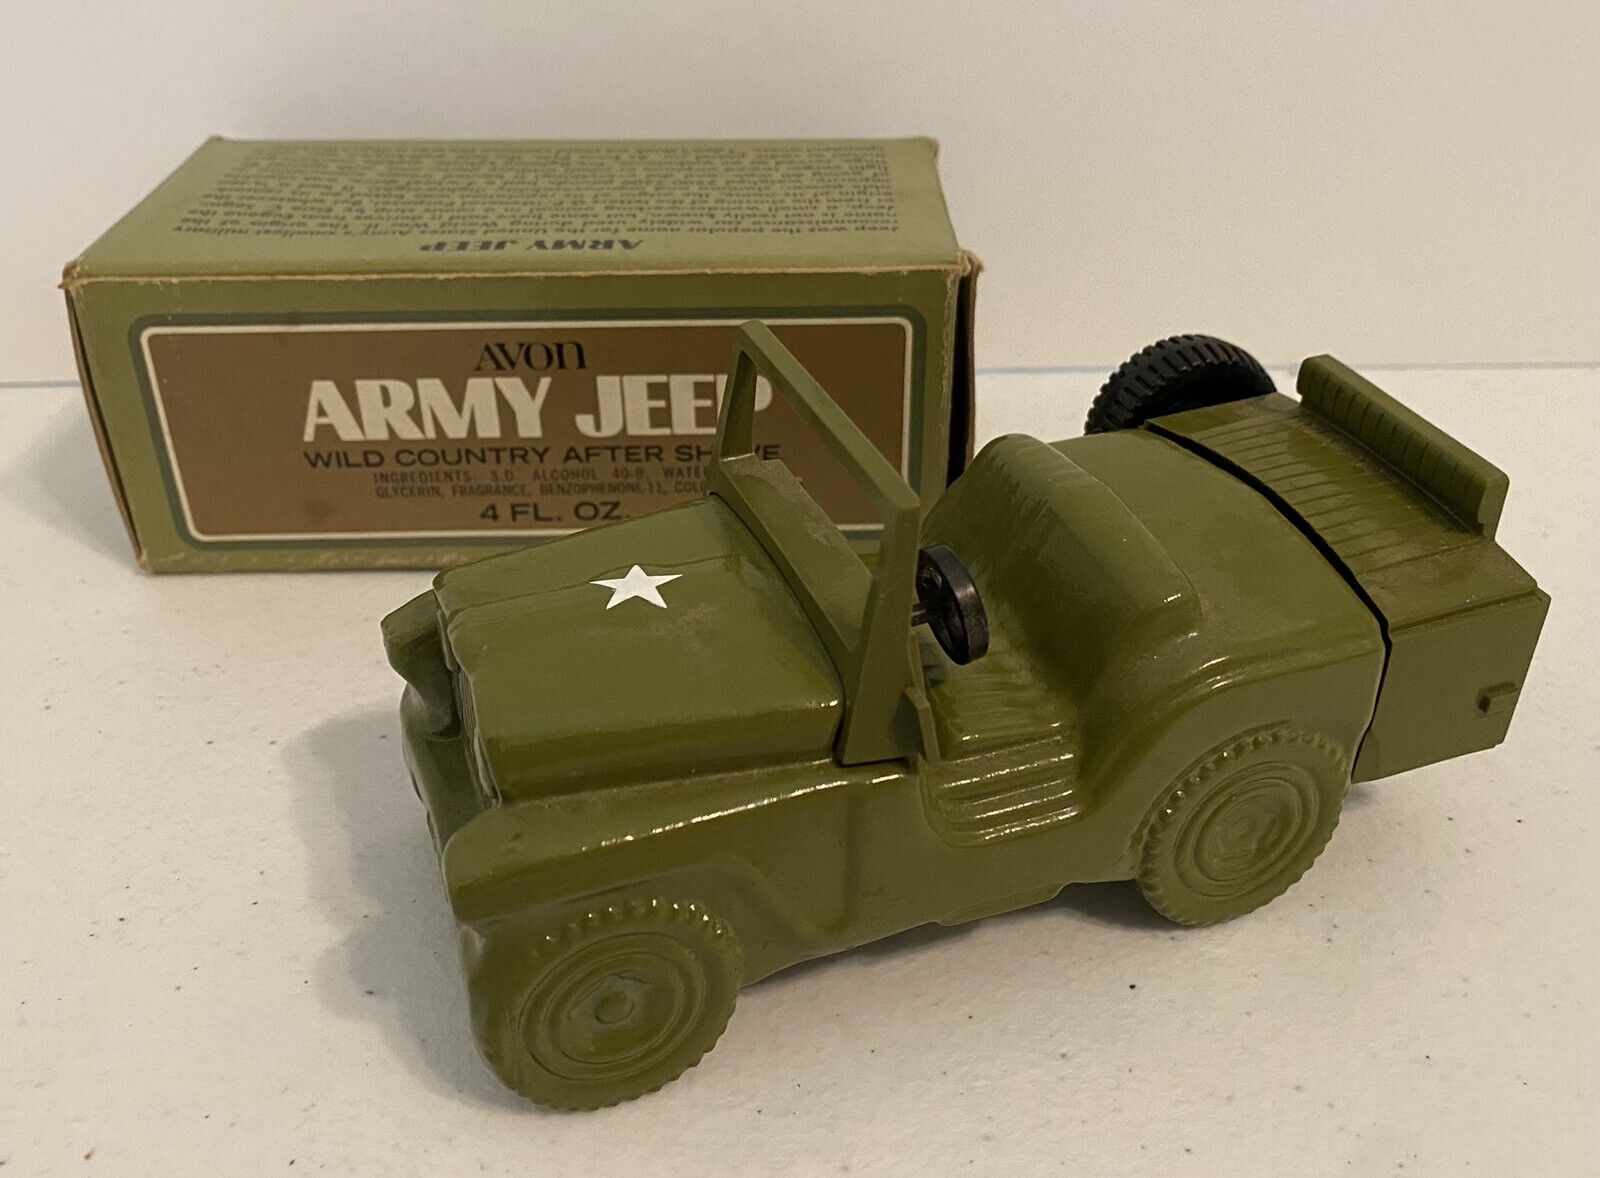 Vintage Avon Army Jeep Green Bottle Decanter Wild Country After Shave 4 Fl Oz